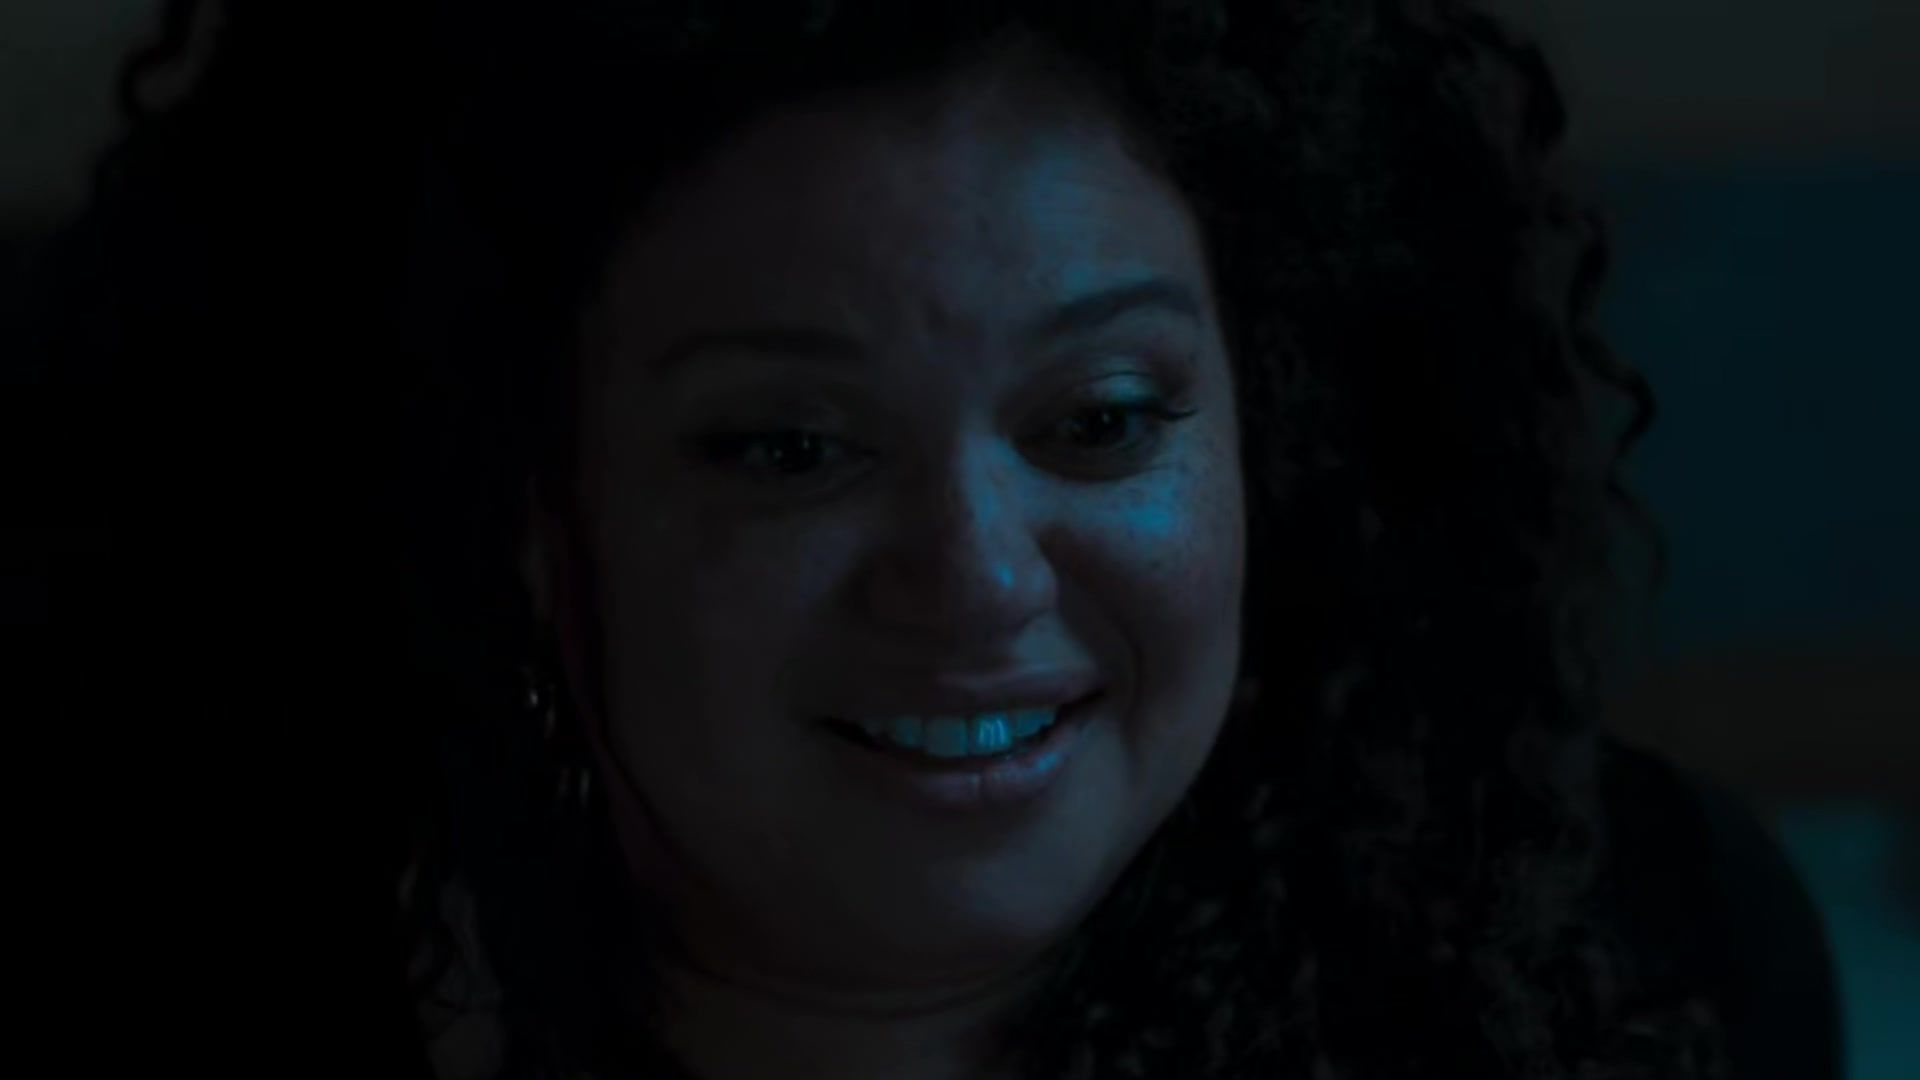 Hooker Nude Michelle Buteau - The First Wives Club s01e01 (2019) Polish - 2